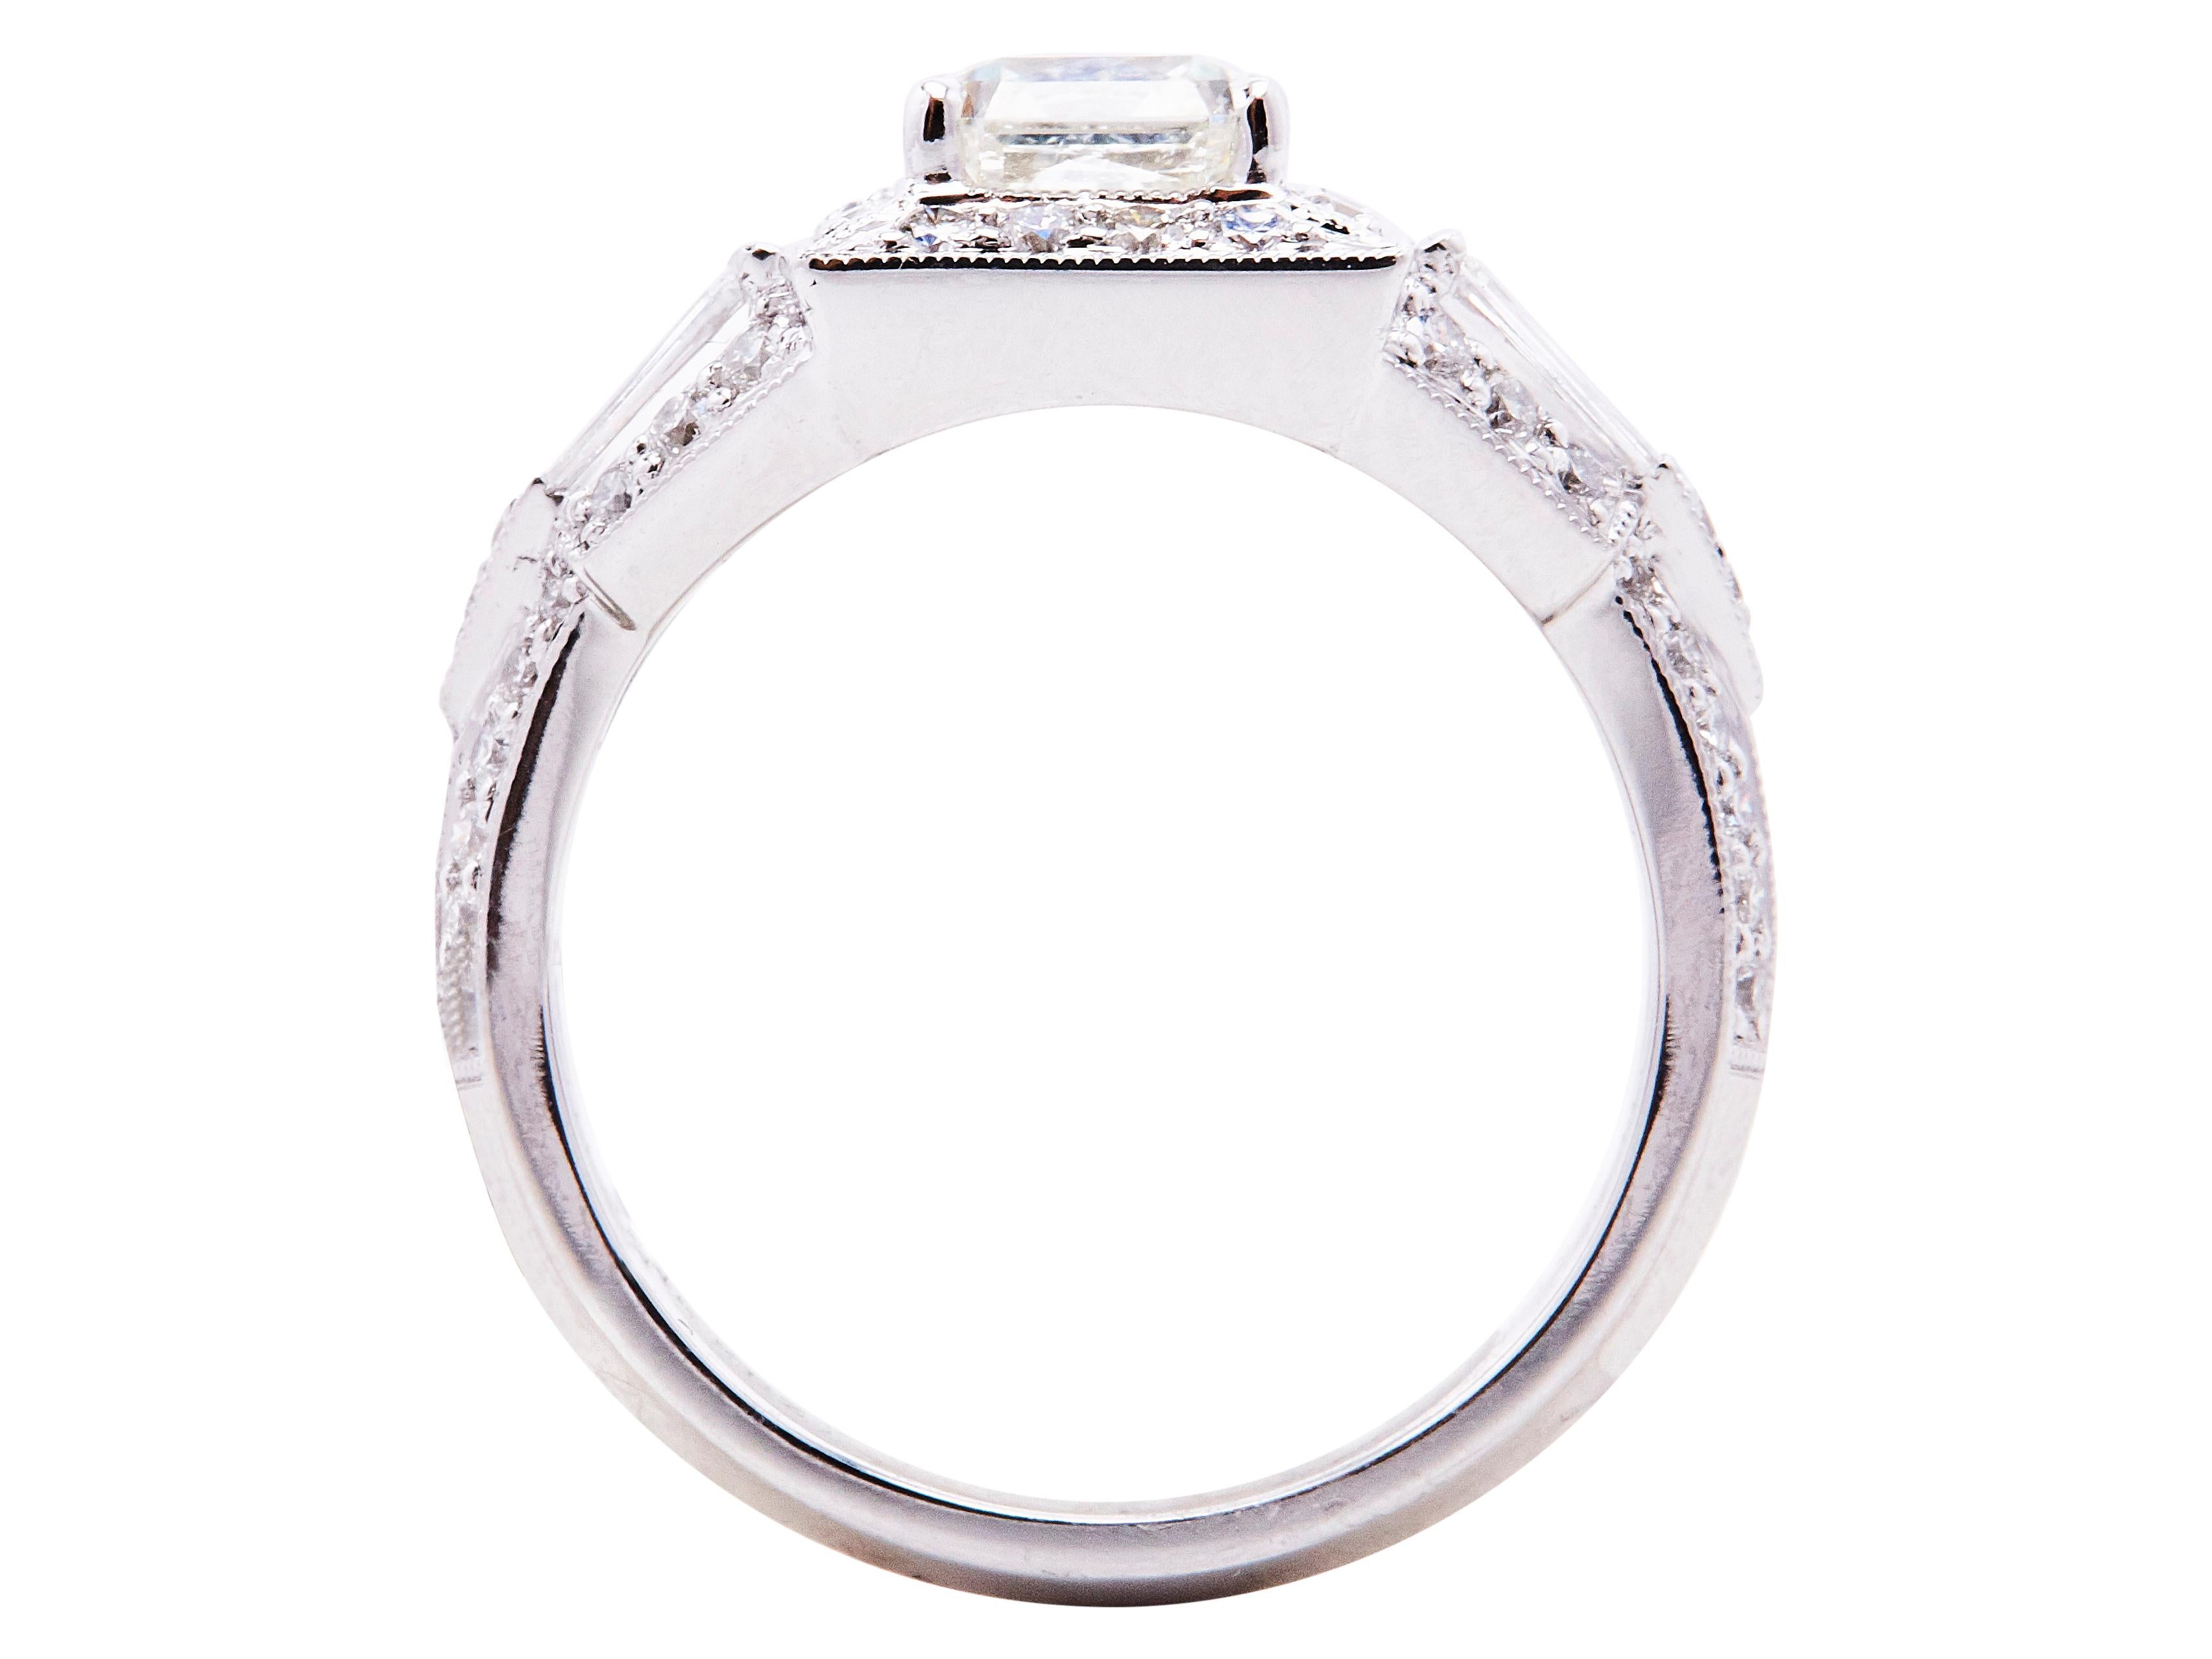 This beautiful and unique 18kt White Gold Radiant Cut vintage-inspired ring is a classic piece. The center Radiant Diamond is 1.53-carat and accented by 4 beautiful 0.25-carat Taper Baguette Diamonds and surrounded by 56, 0.52 Brilliant Round